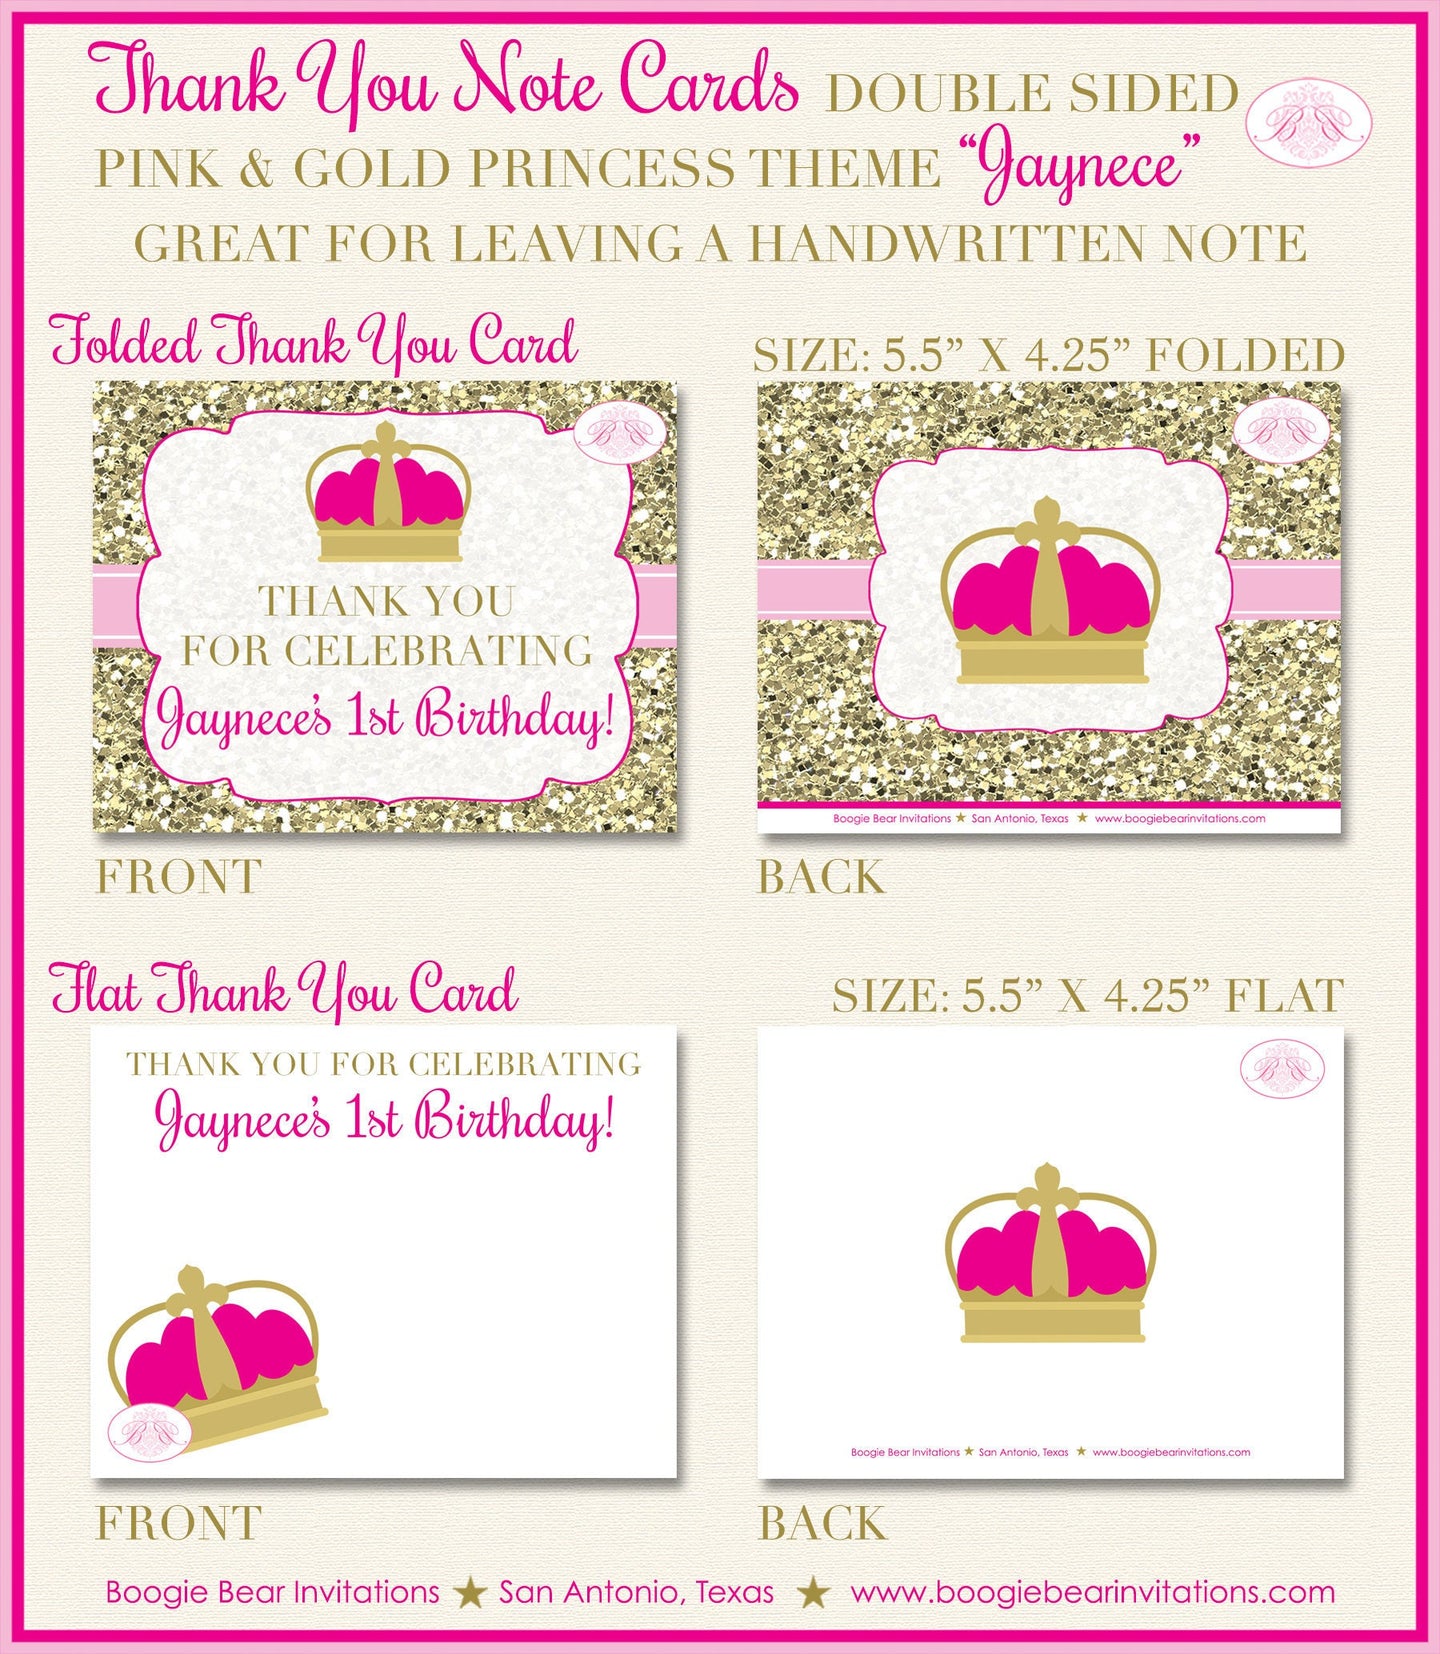 Pink Gold Princess Party Thank You Card Note Birthday Girl Crown Glitter Royal Queen Ball Glam Boogie Bear Invitations Jaynece Theme Printed